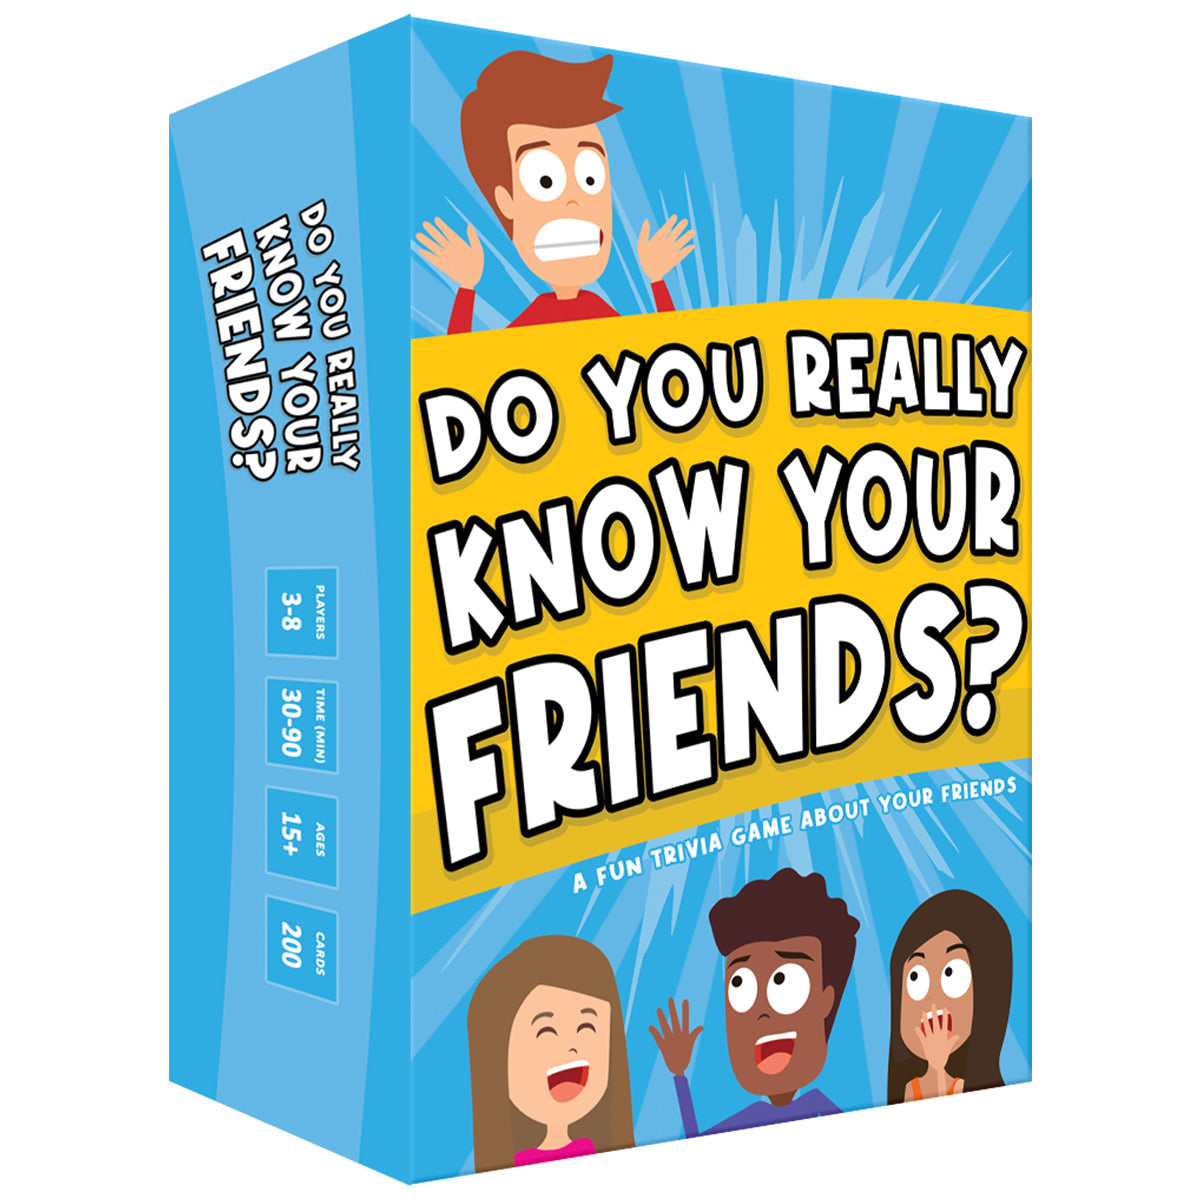 Do You Really Know Your Friends?